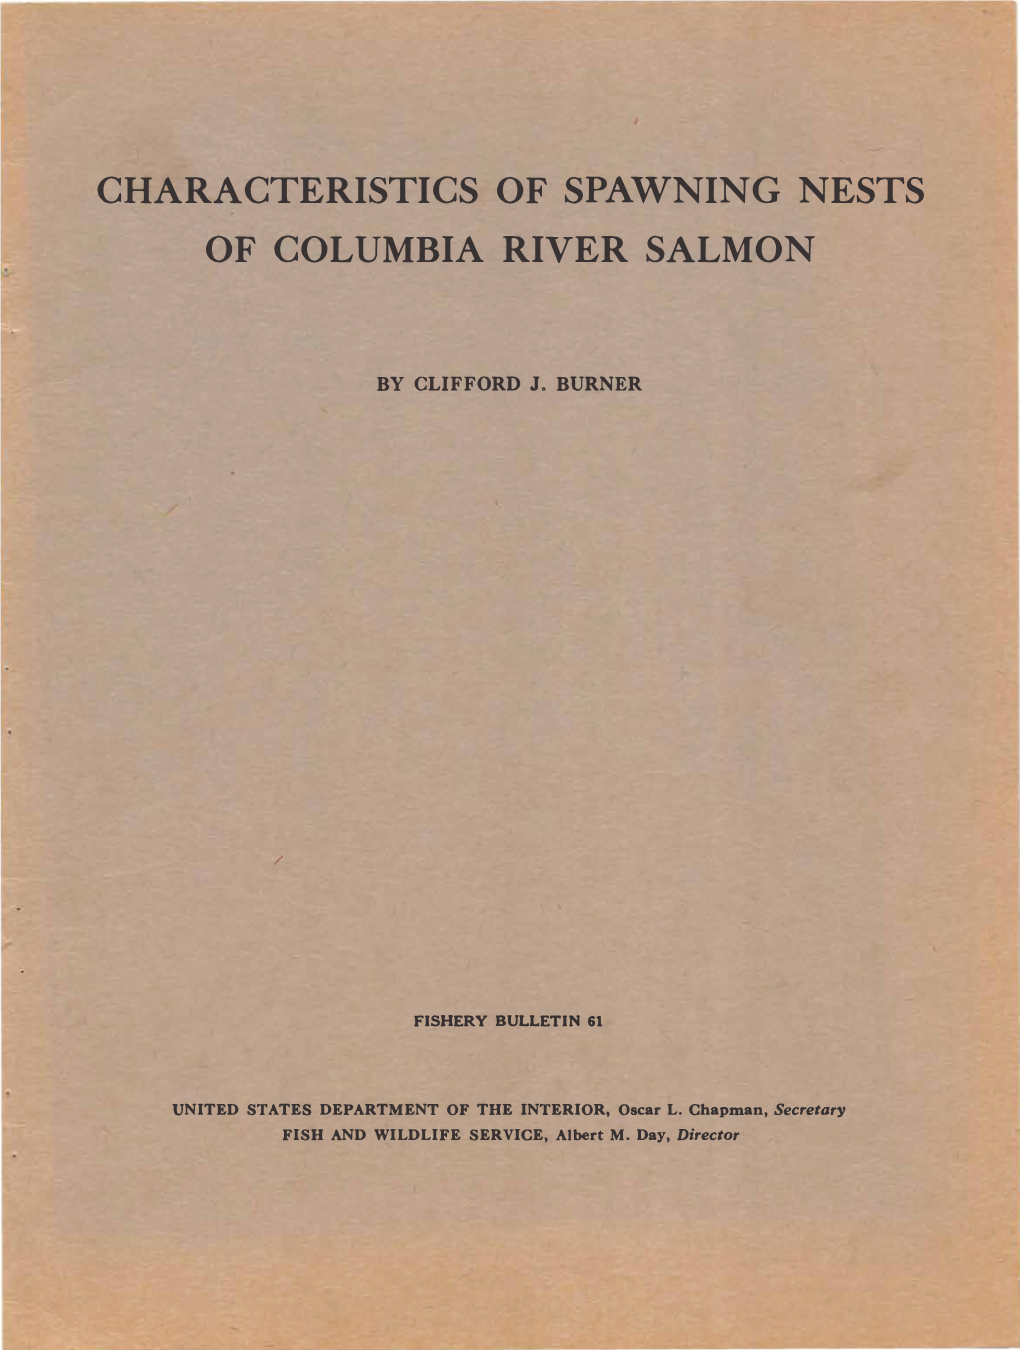 Characteristics of Spawning Nests of Columbia River Salmon